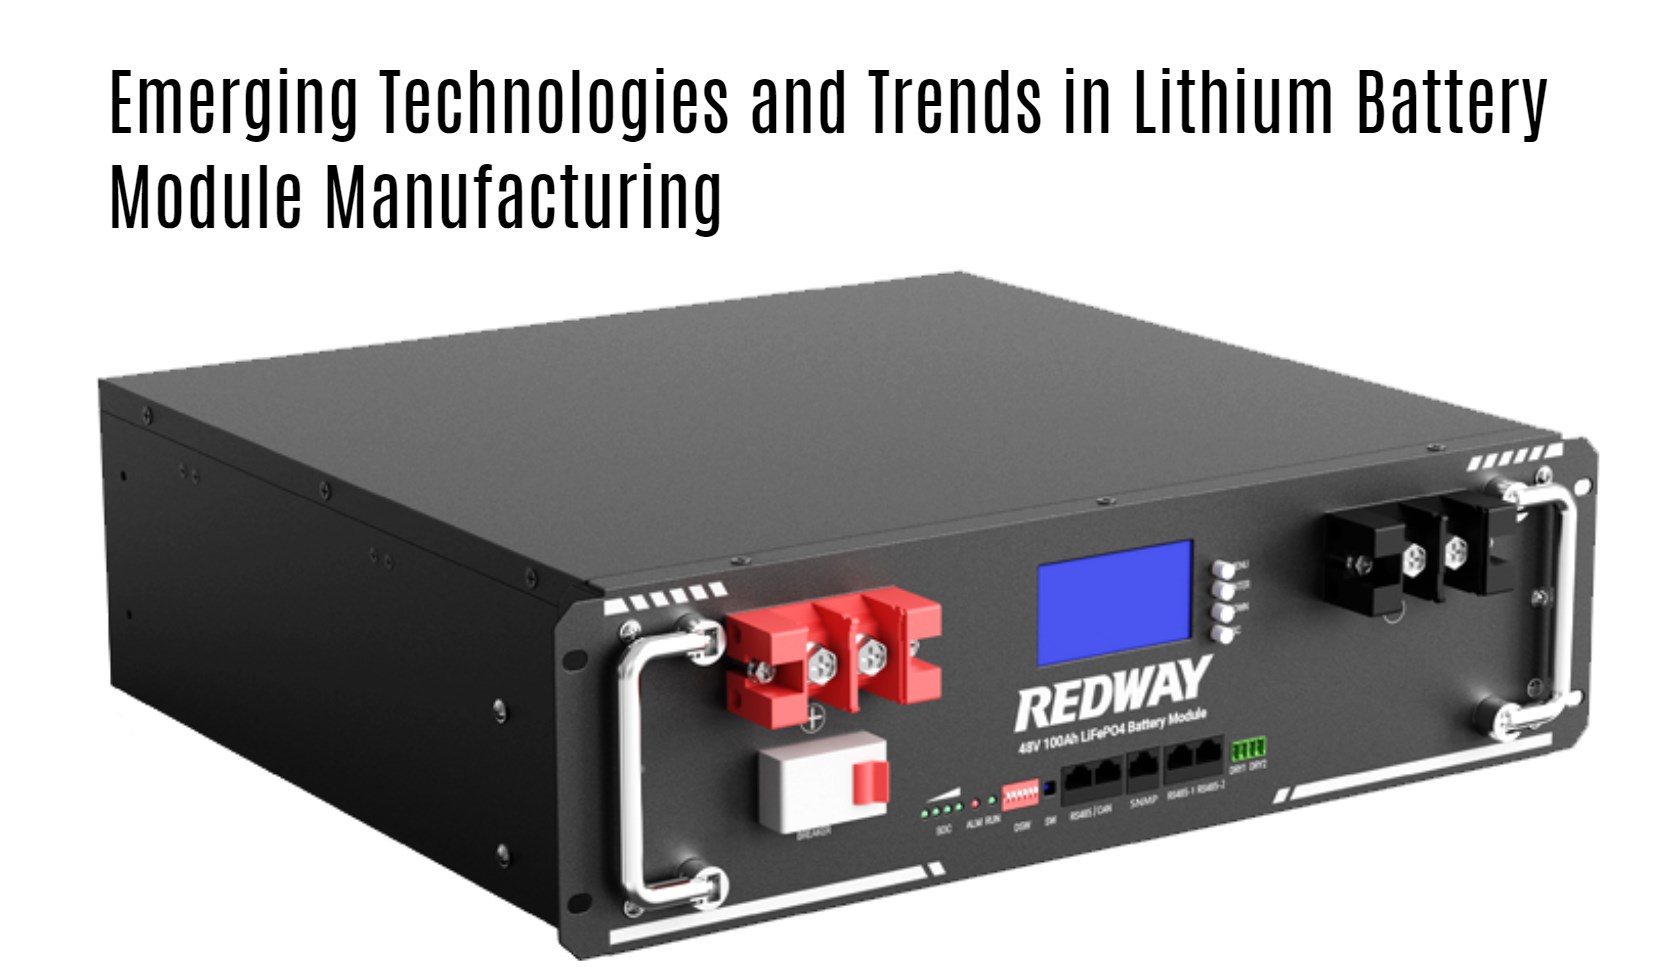 Emerging Technologies and Trends in Lithium Battery Module Manufacturing